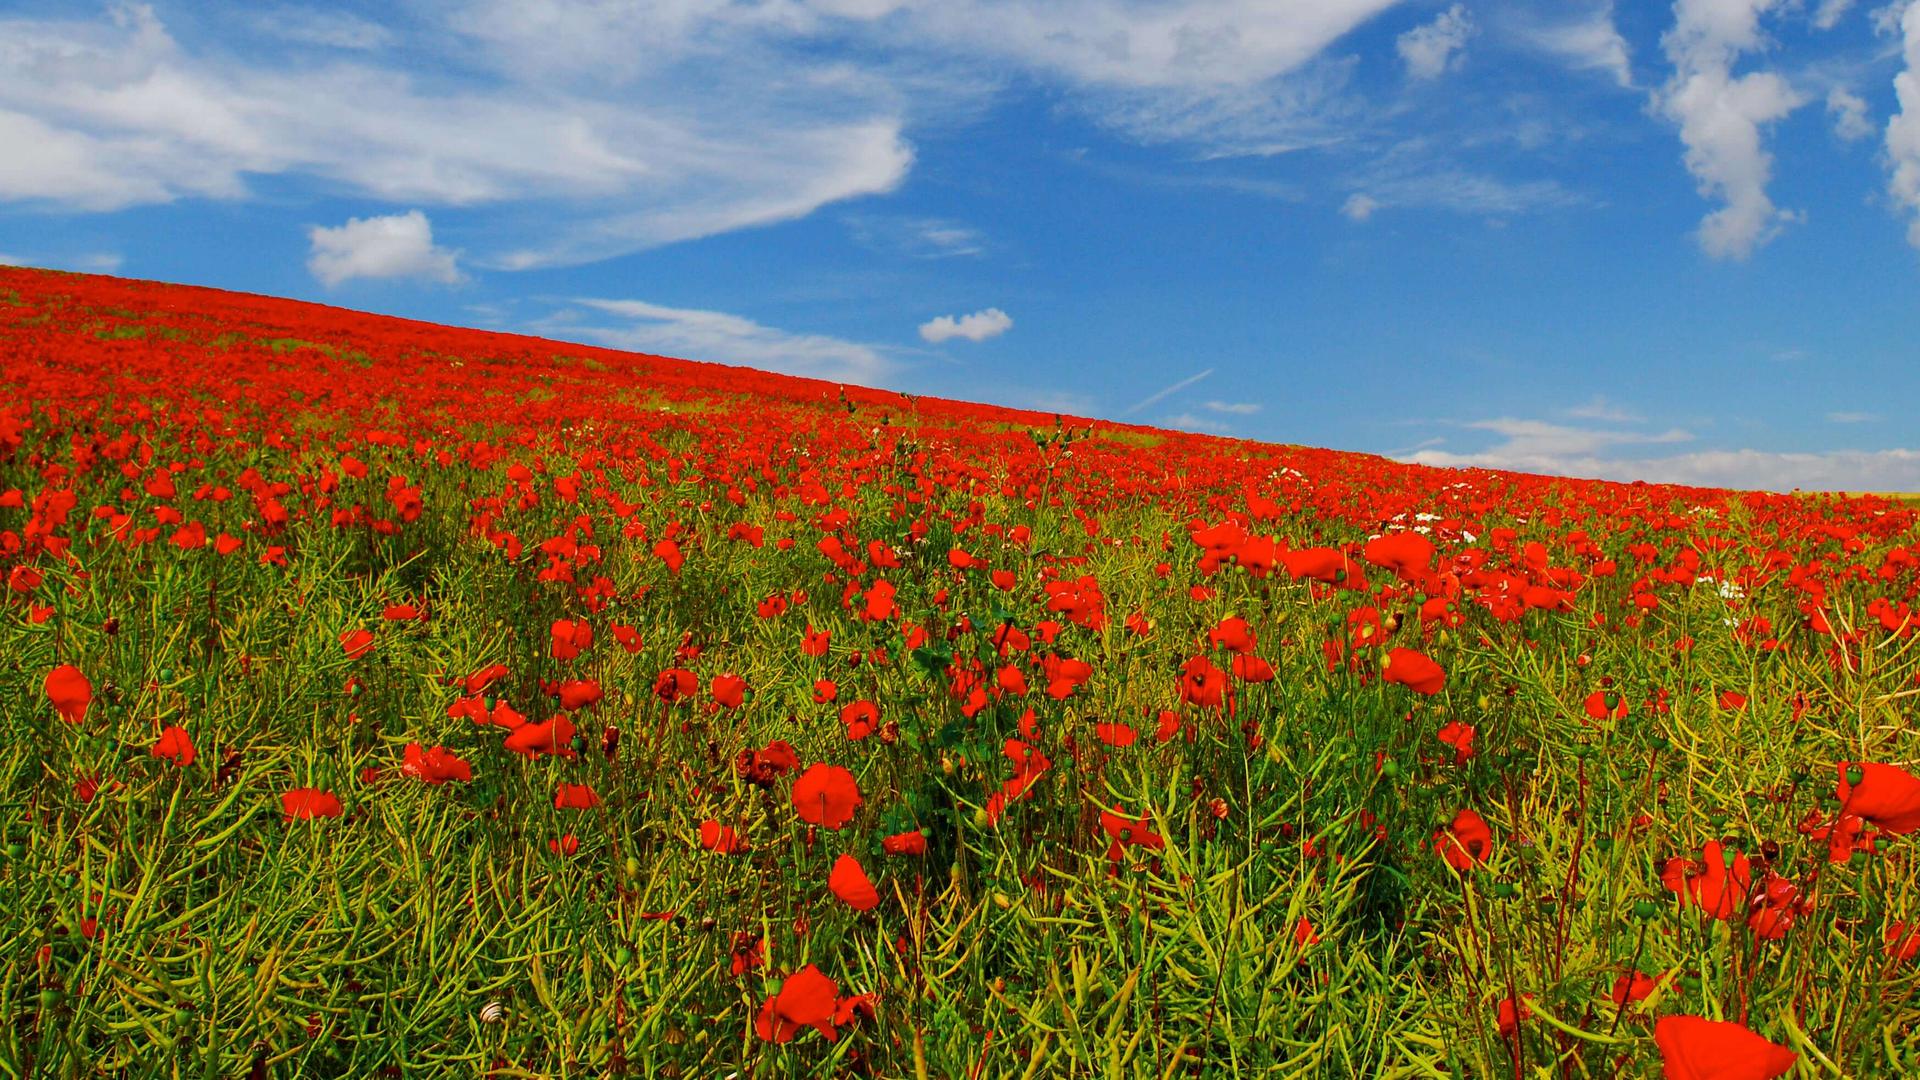 Red poppies in green grass under a blue sky. 